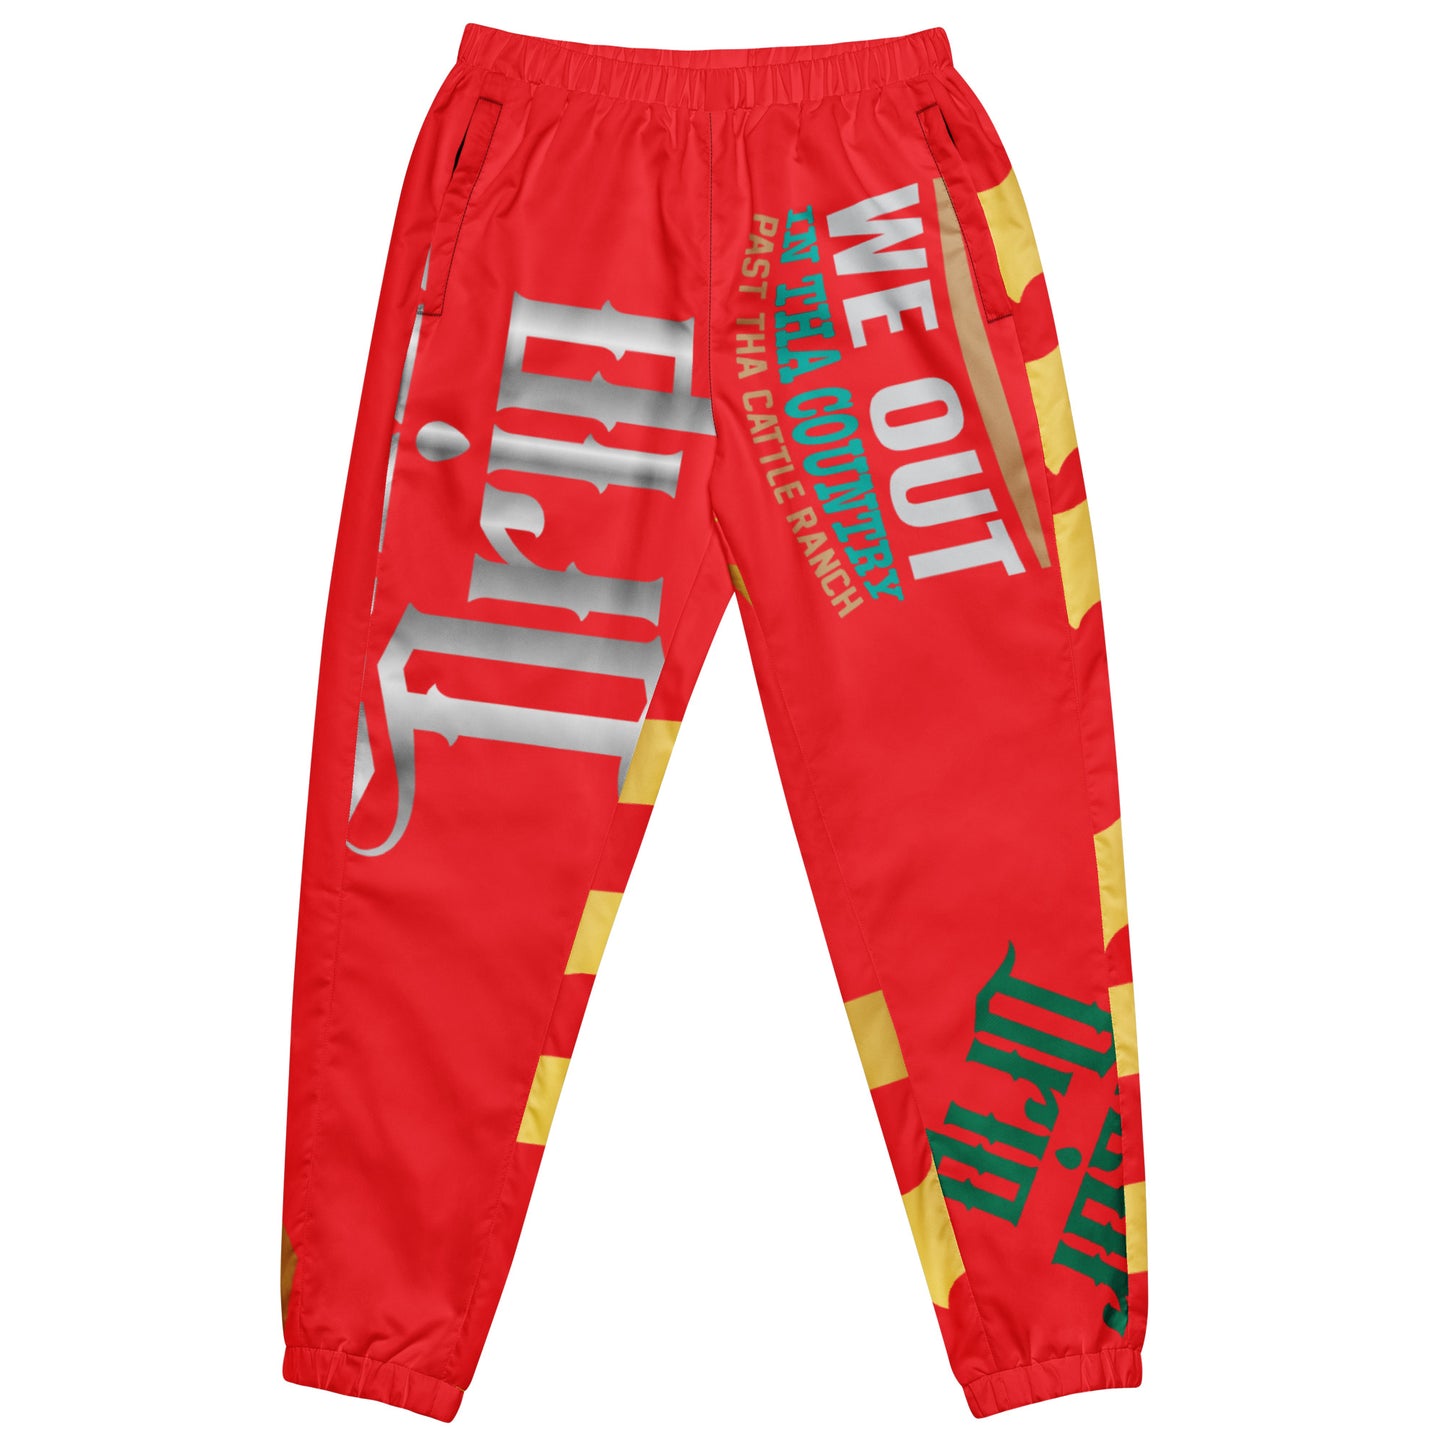 Alizarian Gator Drip Exclusive Supa-Heavy Excess-Stunna Flex Alligator Playuz Limited Edition OG Multi-Logo Rich Daddy “We Out In Tha Country Past Tha Cattle Ranch” Unisex Playuz Track Pants